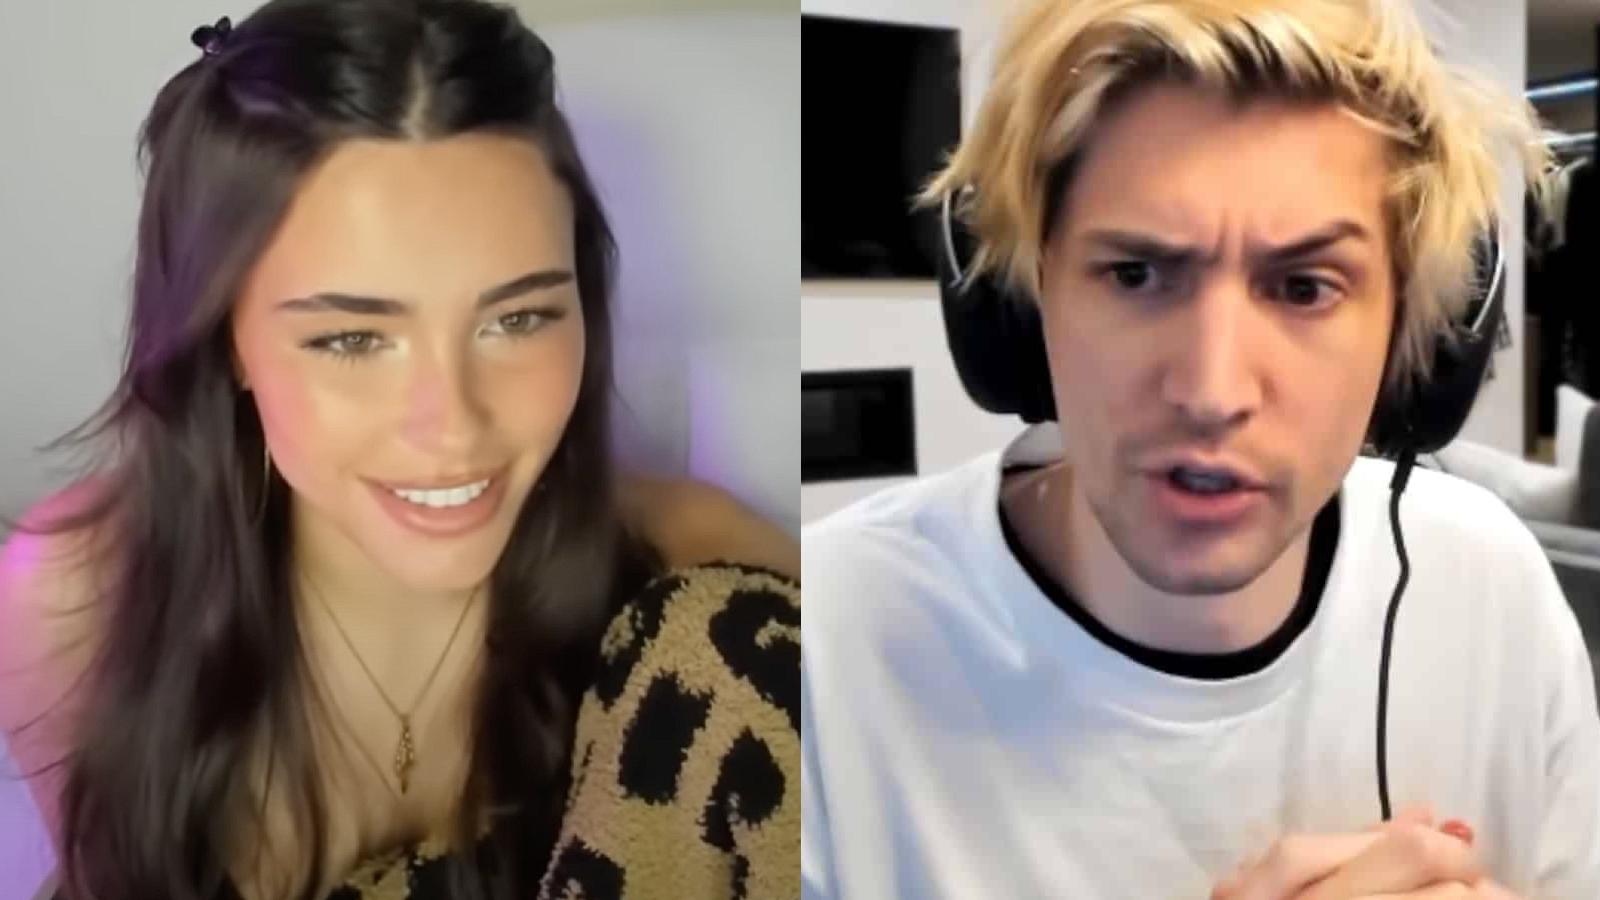 Madison Beer and xQc side by side image during Twitch streams